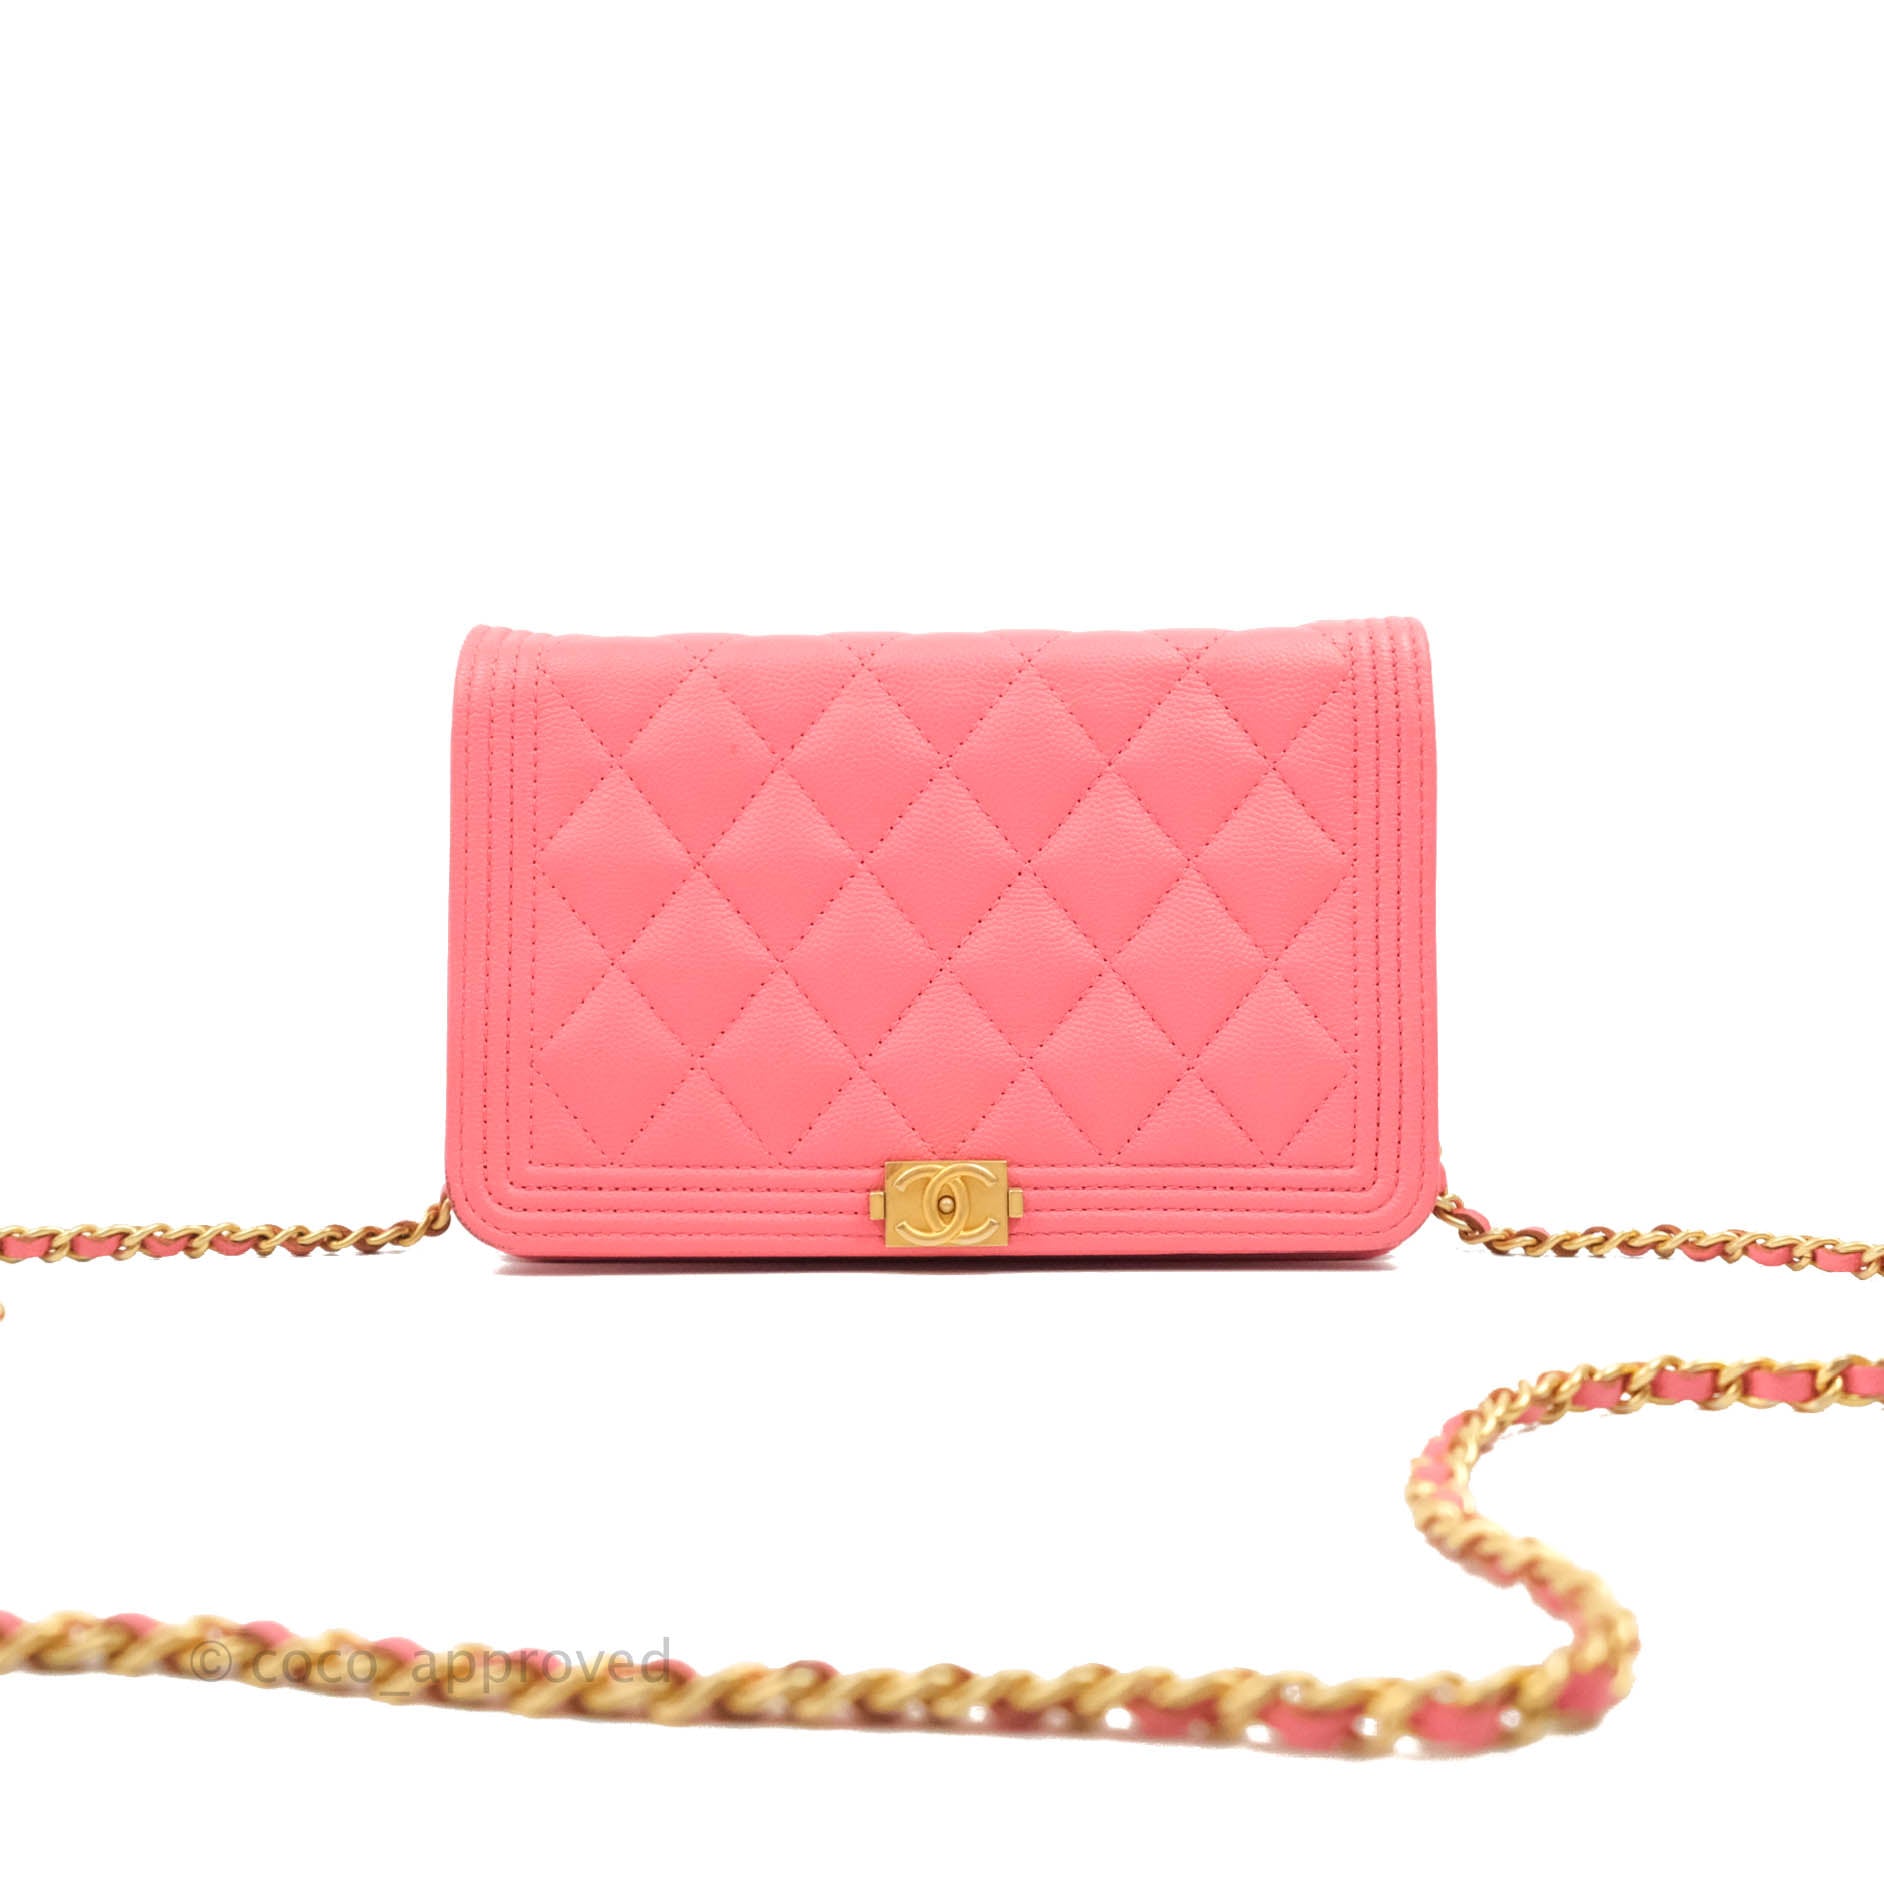 Sold at Auction: Chanel Quilted Peach Patent Leather Wallet on Chain